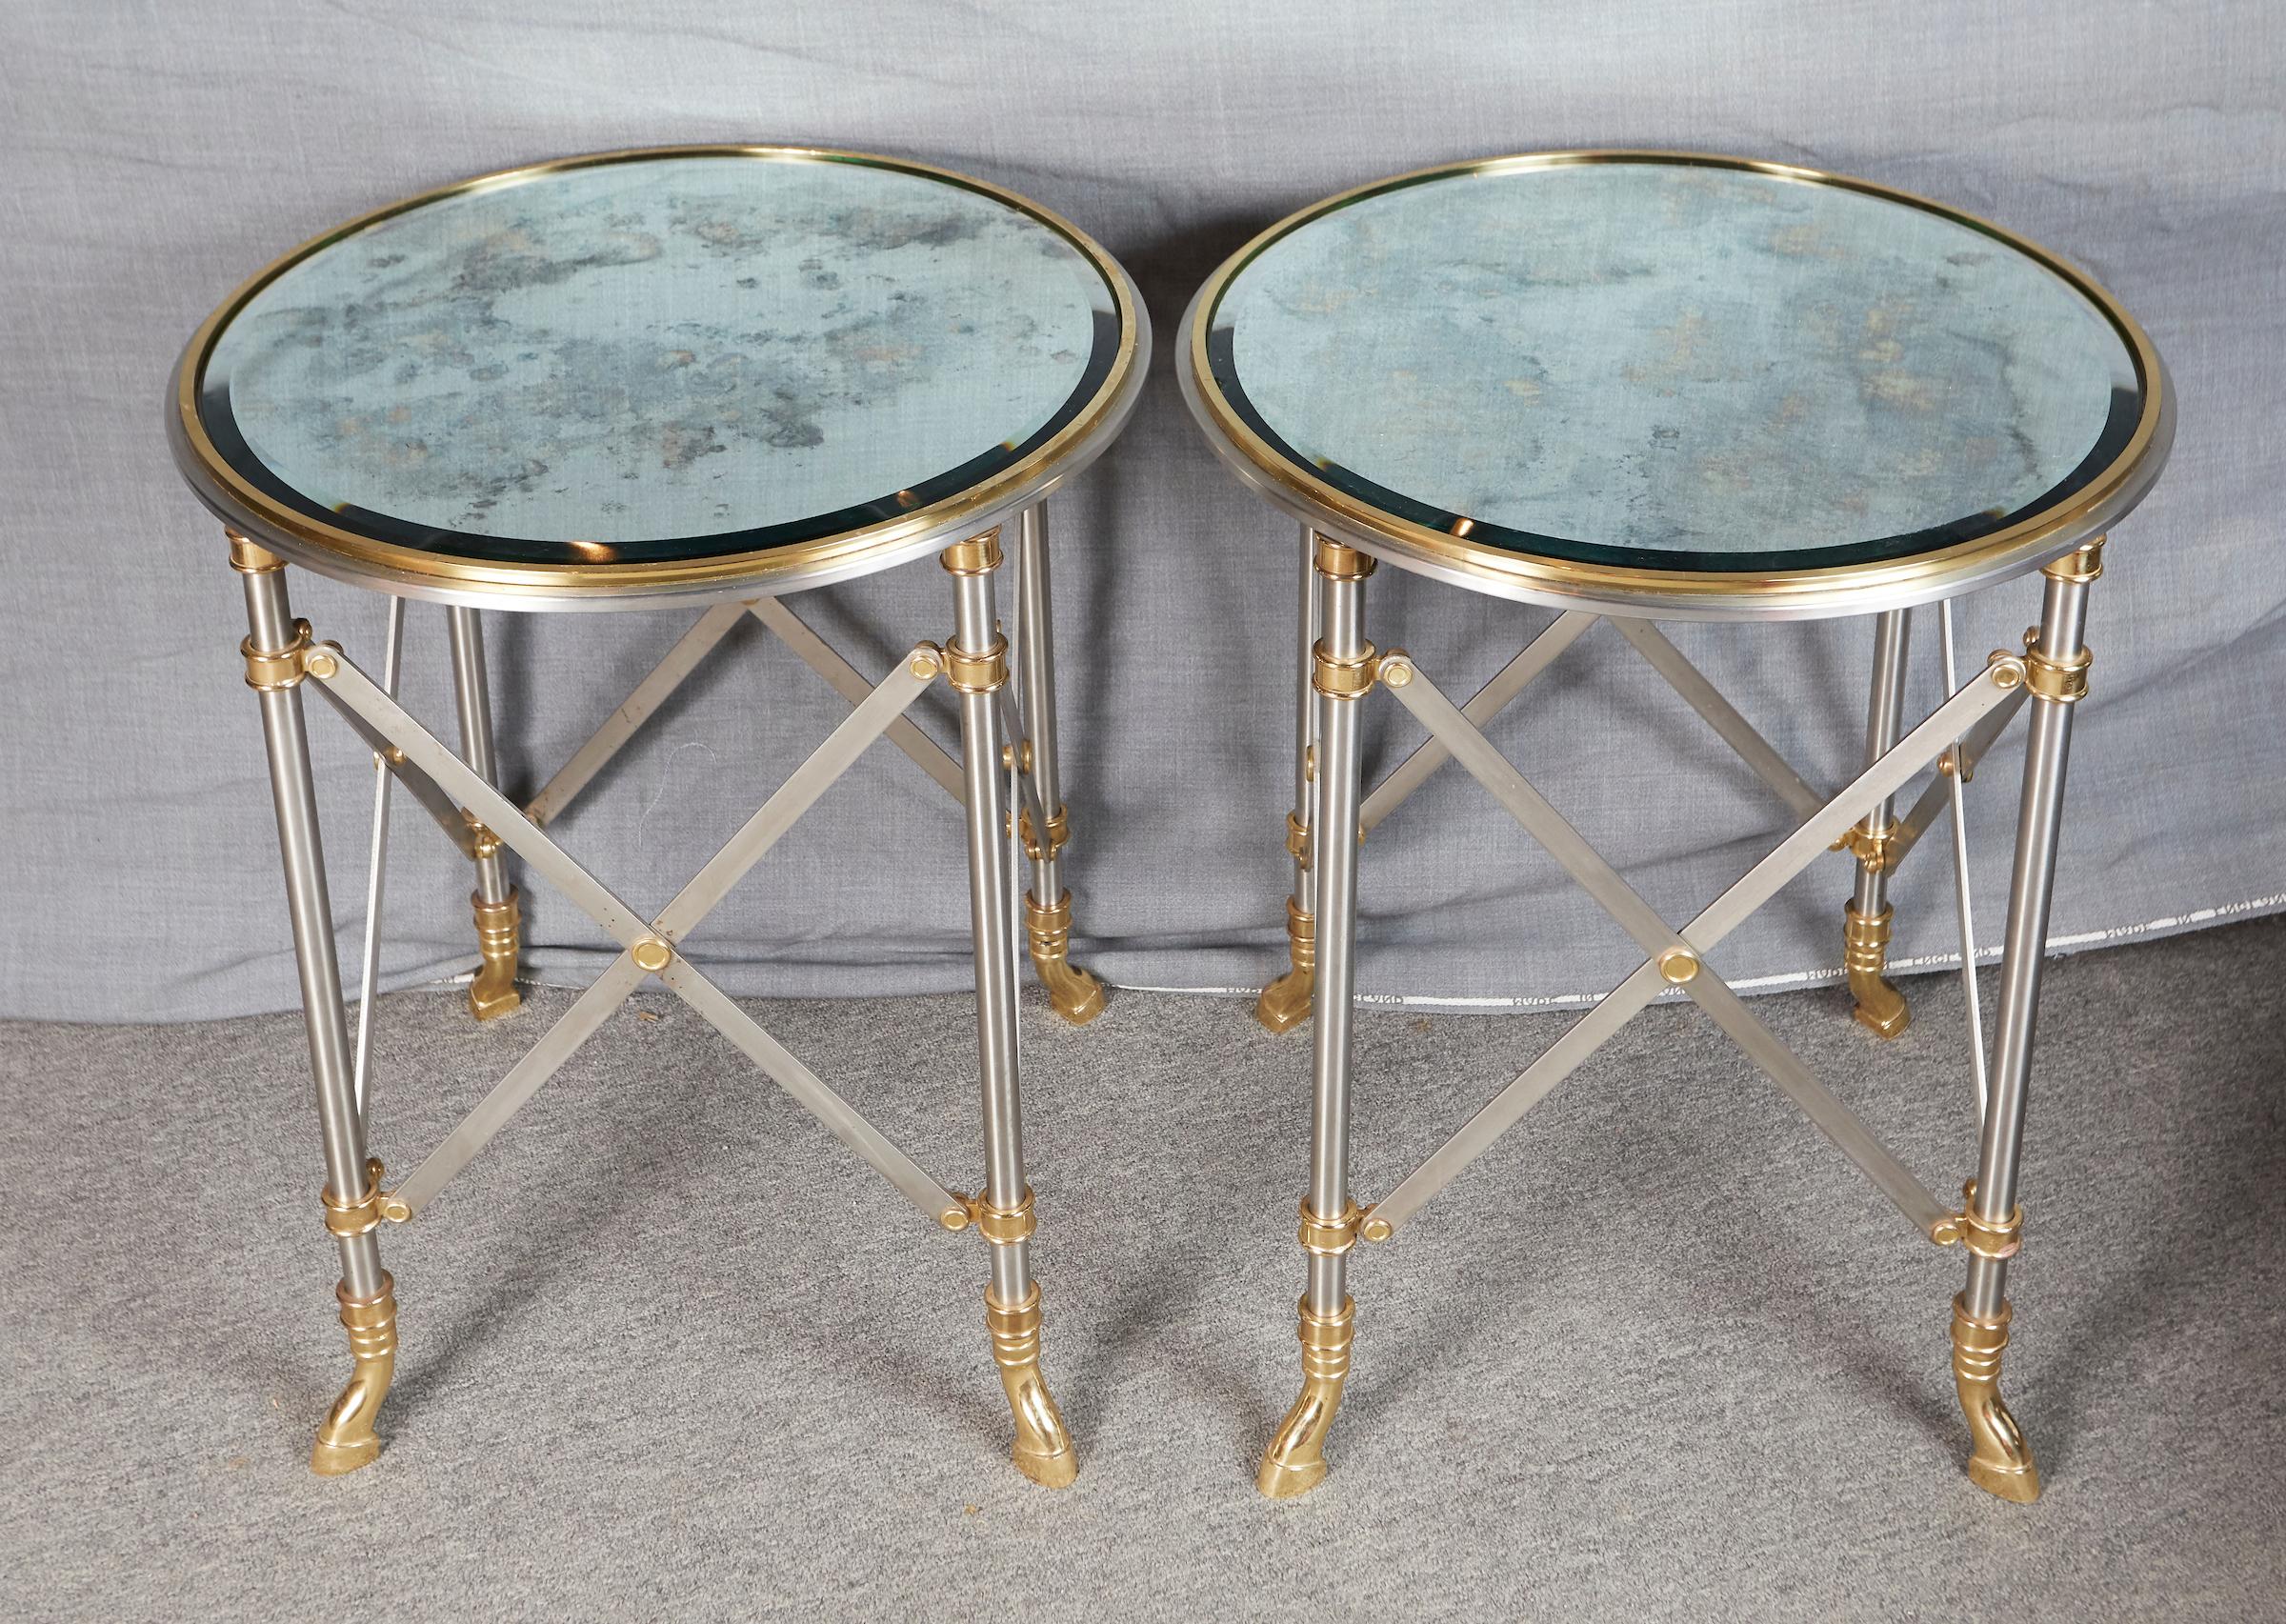 Pair of Brass and Polished Steel Side Tables by Maison Jansen (Französisch)